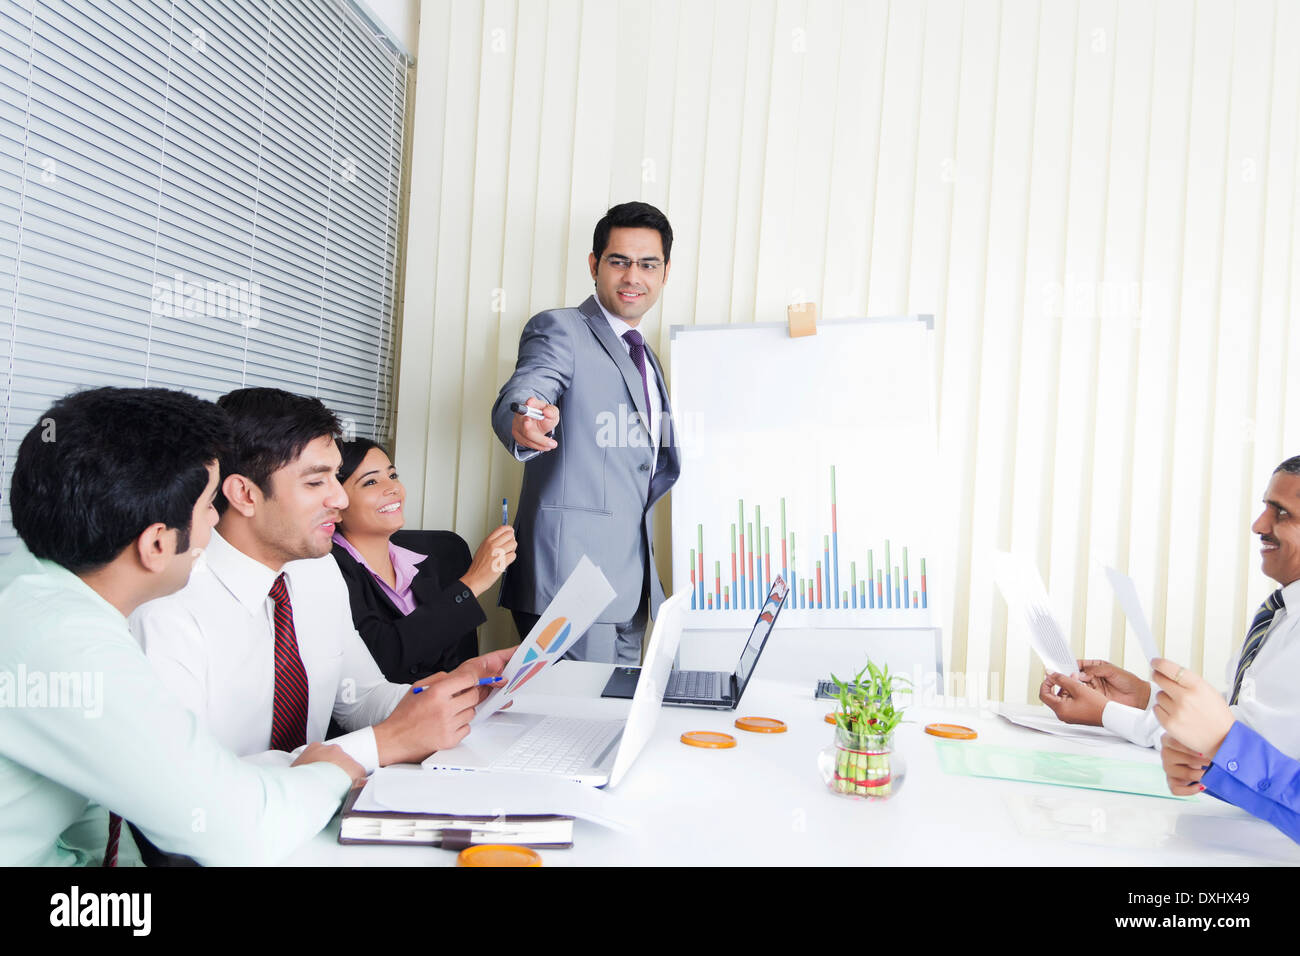 Indian Business People Meeting in Office Stock Photo